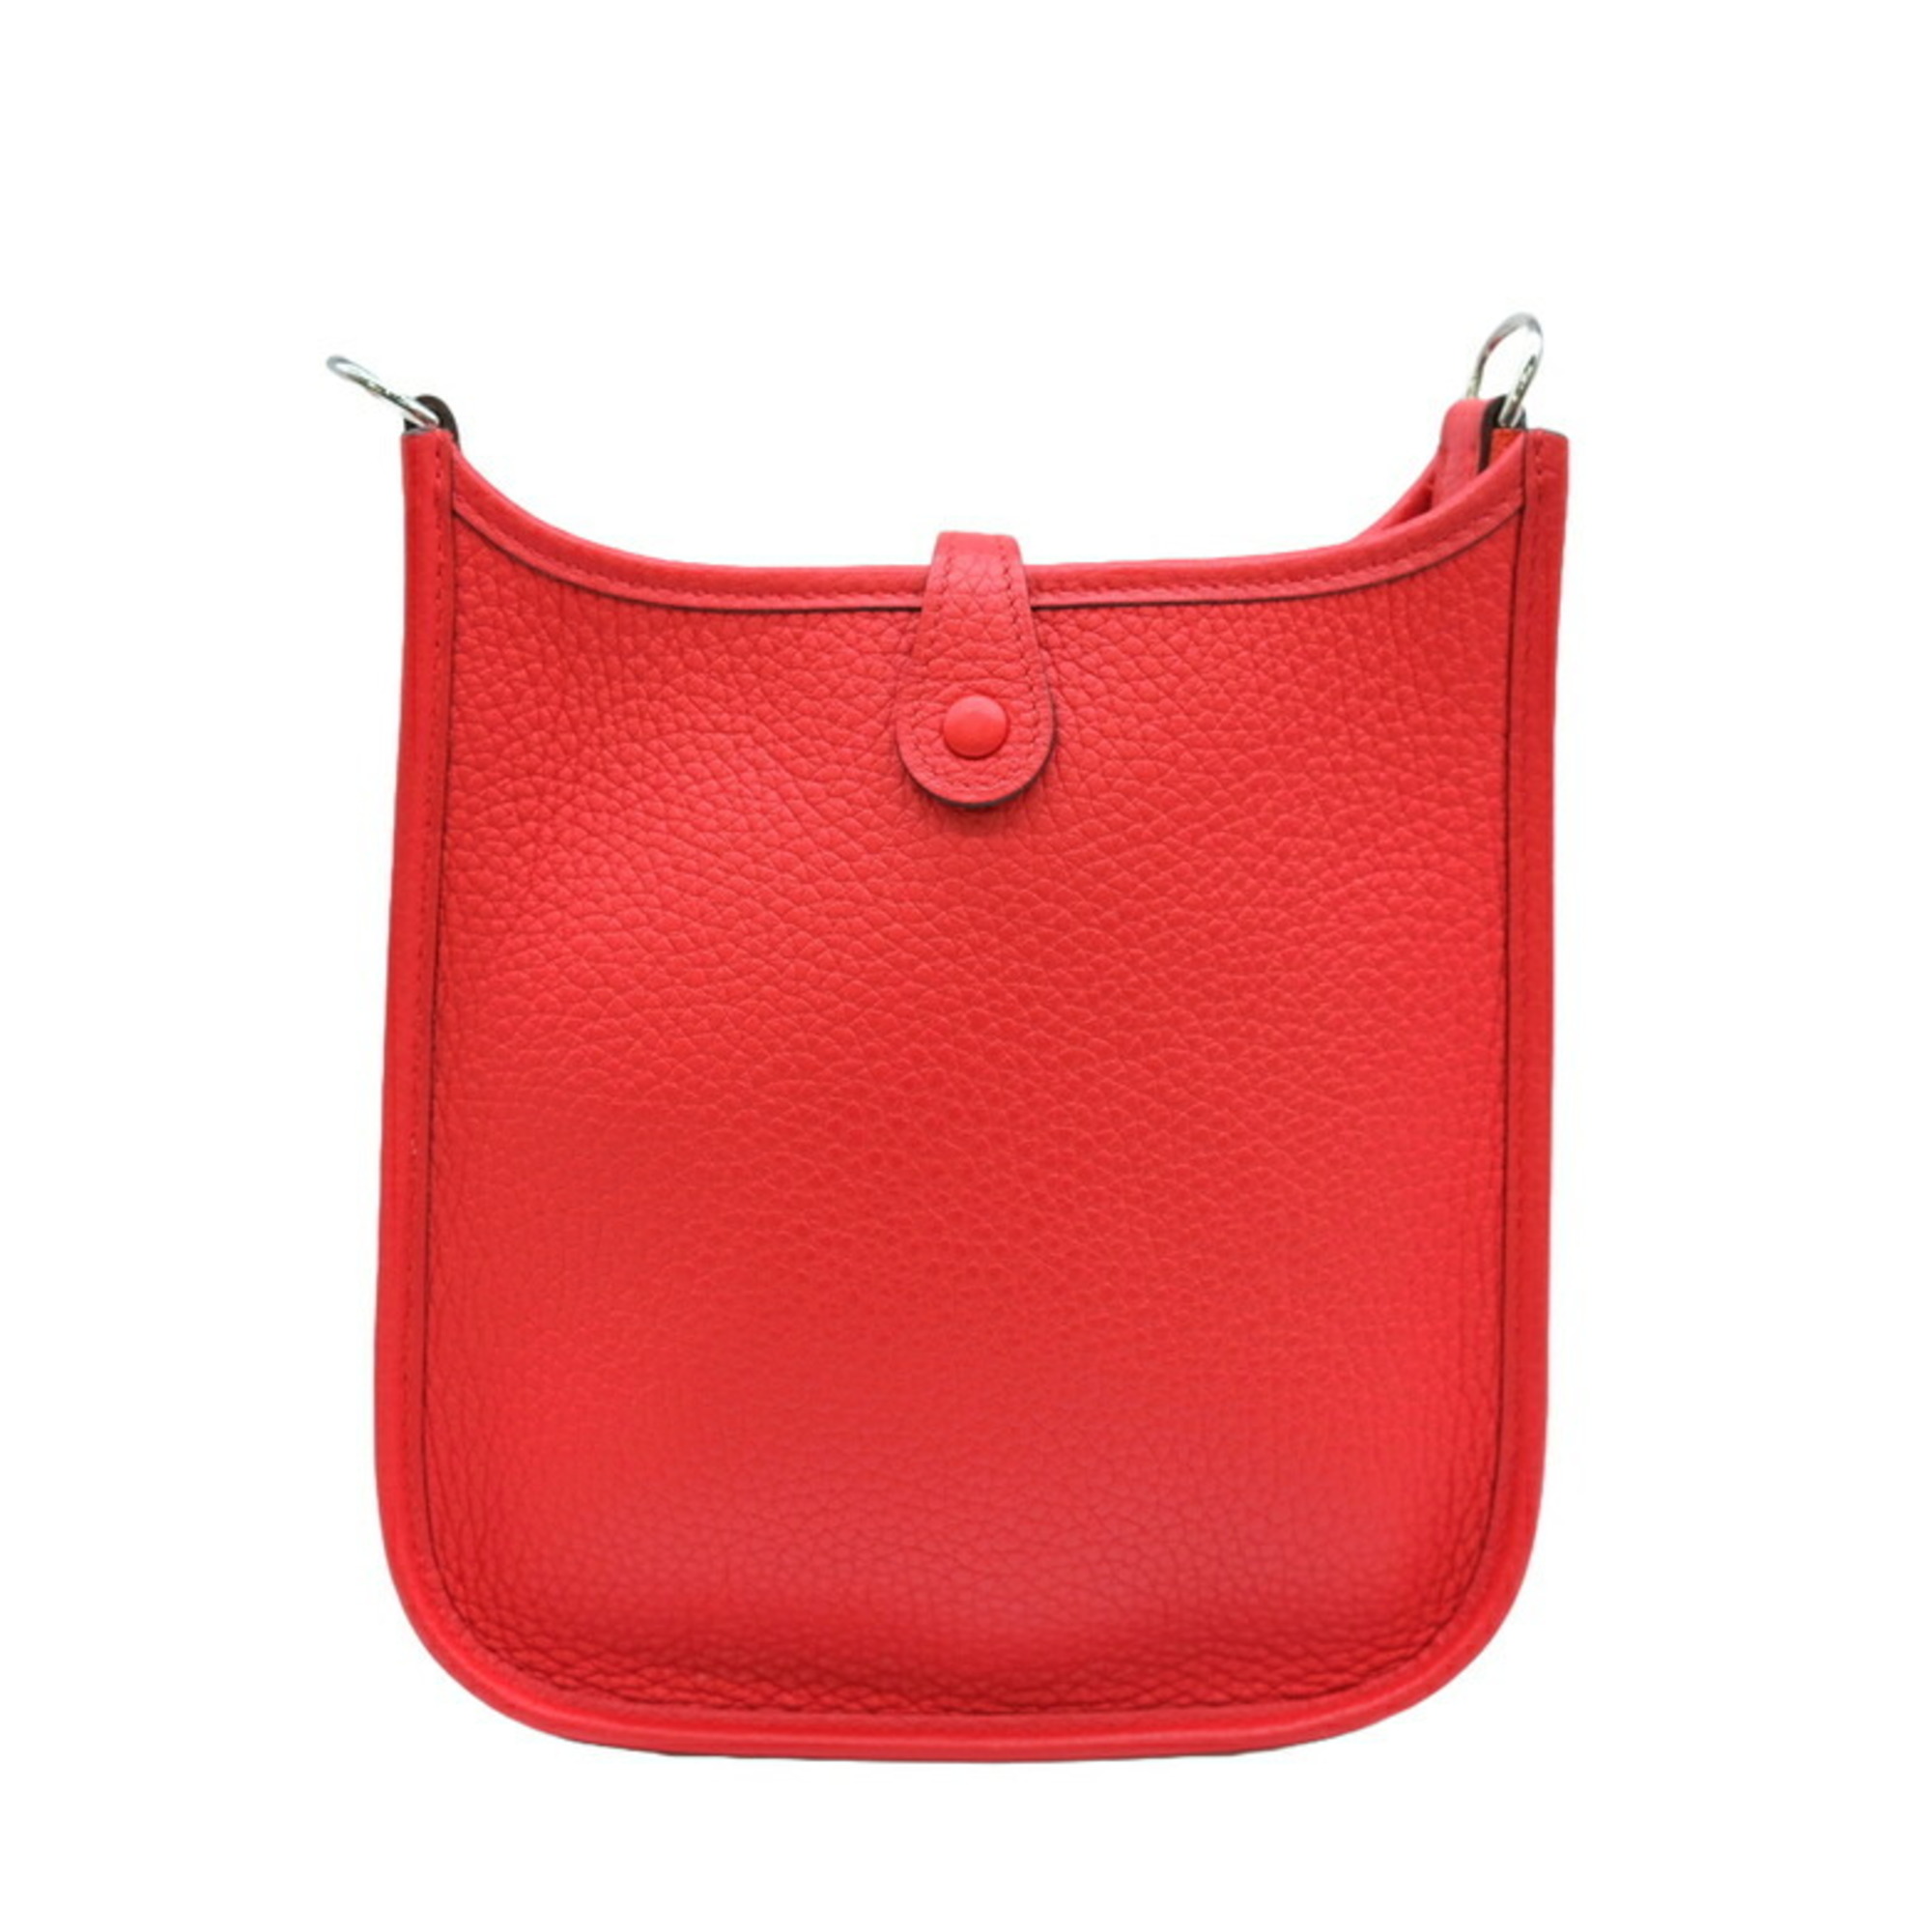 HERMES Evelyn TPM shoulder bag in leather, Taurillon Clemence, Rouge Coeur, red